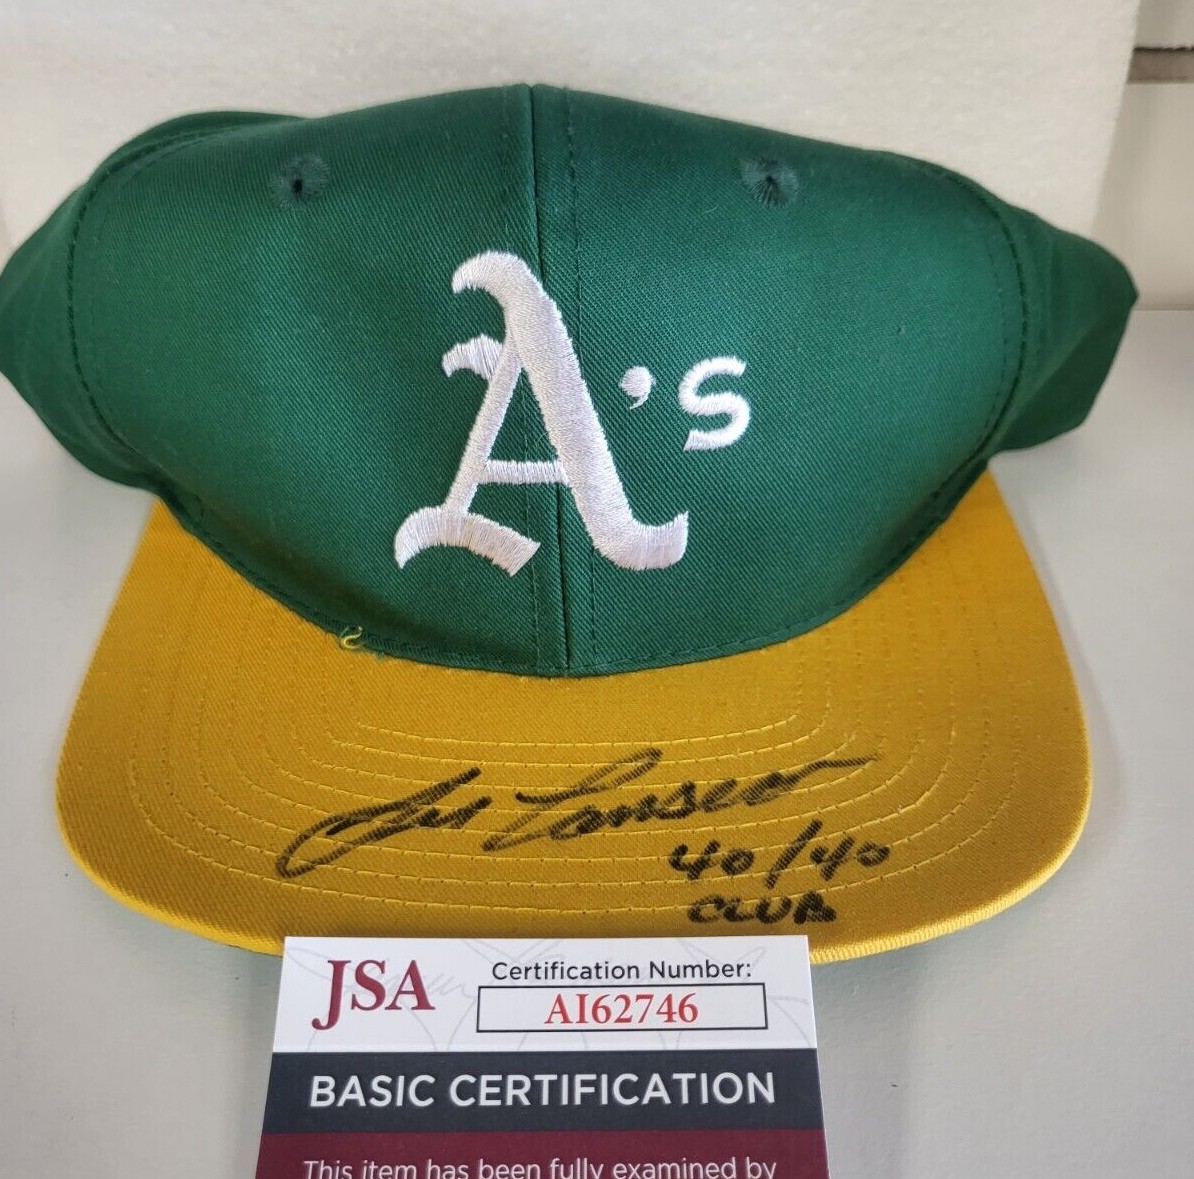 Oakland Athletics Jose Canseco Signed Jersey with 40/40